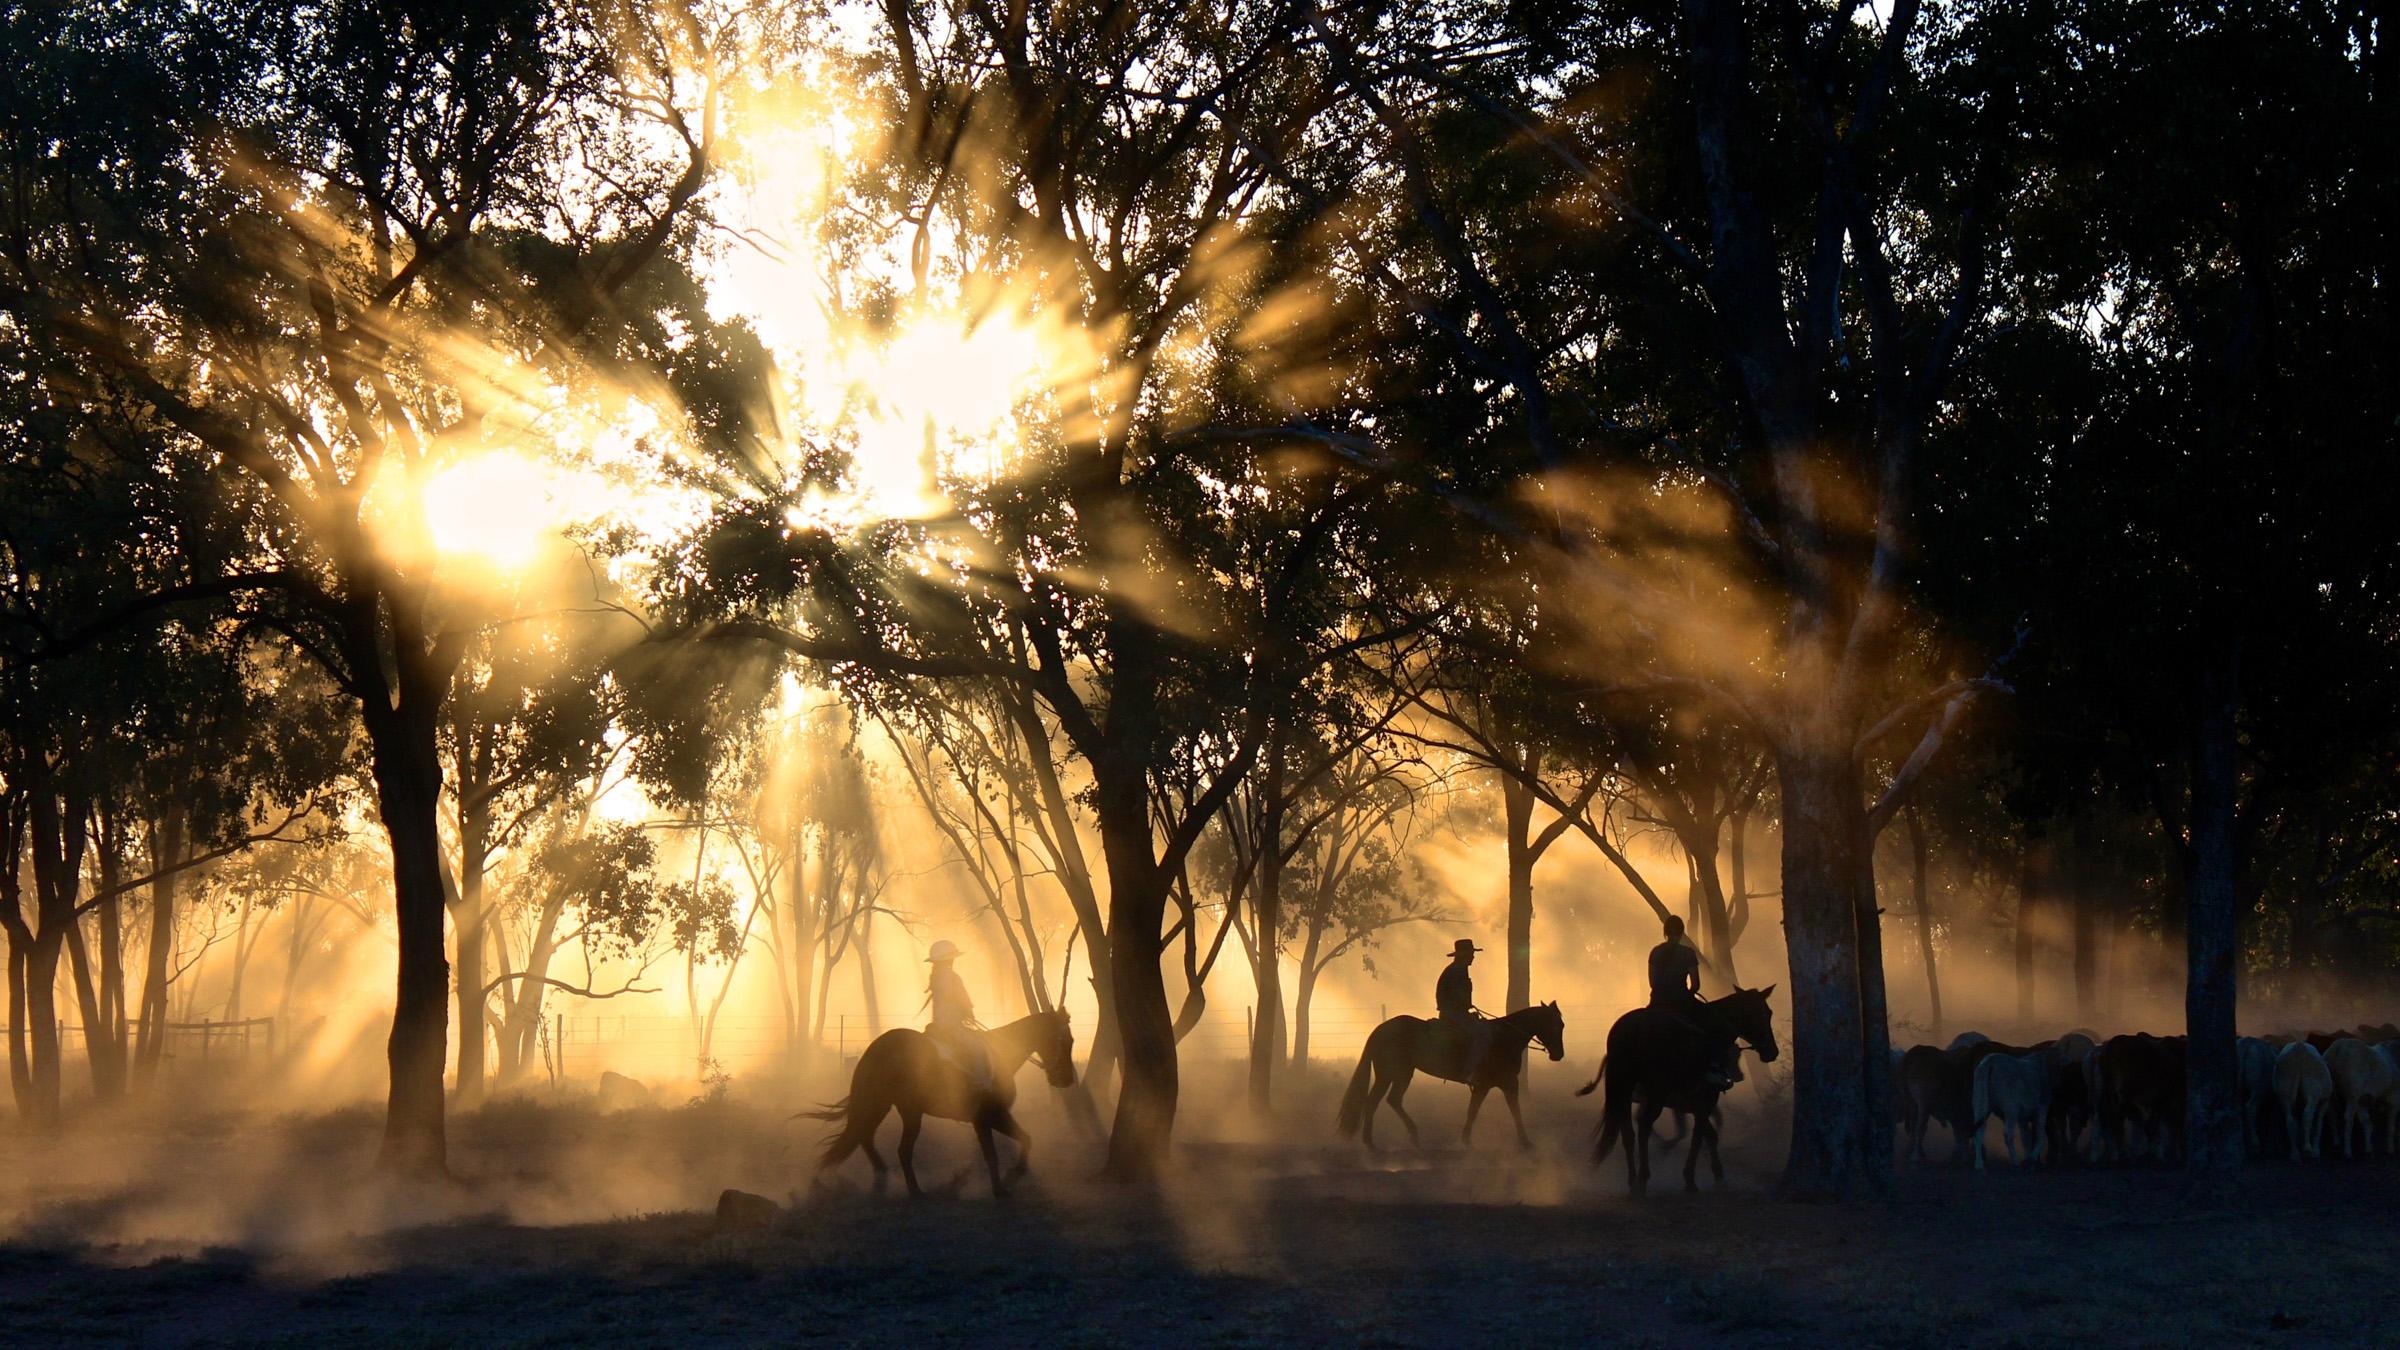 Three horse riders mustering a herd of cattle in dusty bush landscape